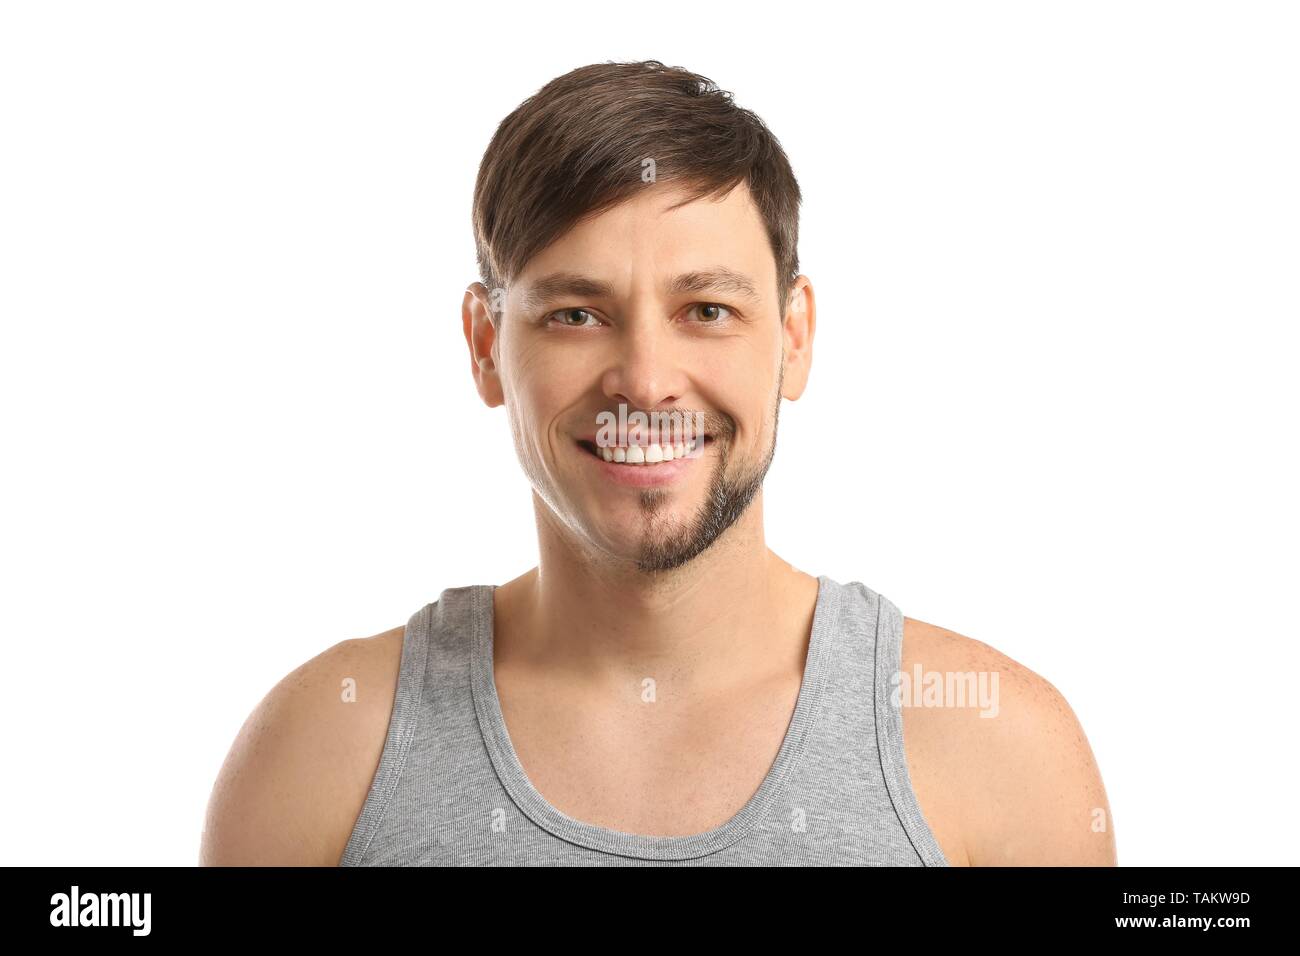 Handsome man having half of his face shaved against white background Stock Photo